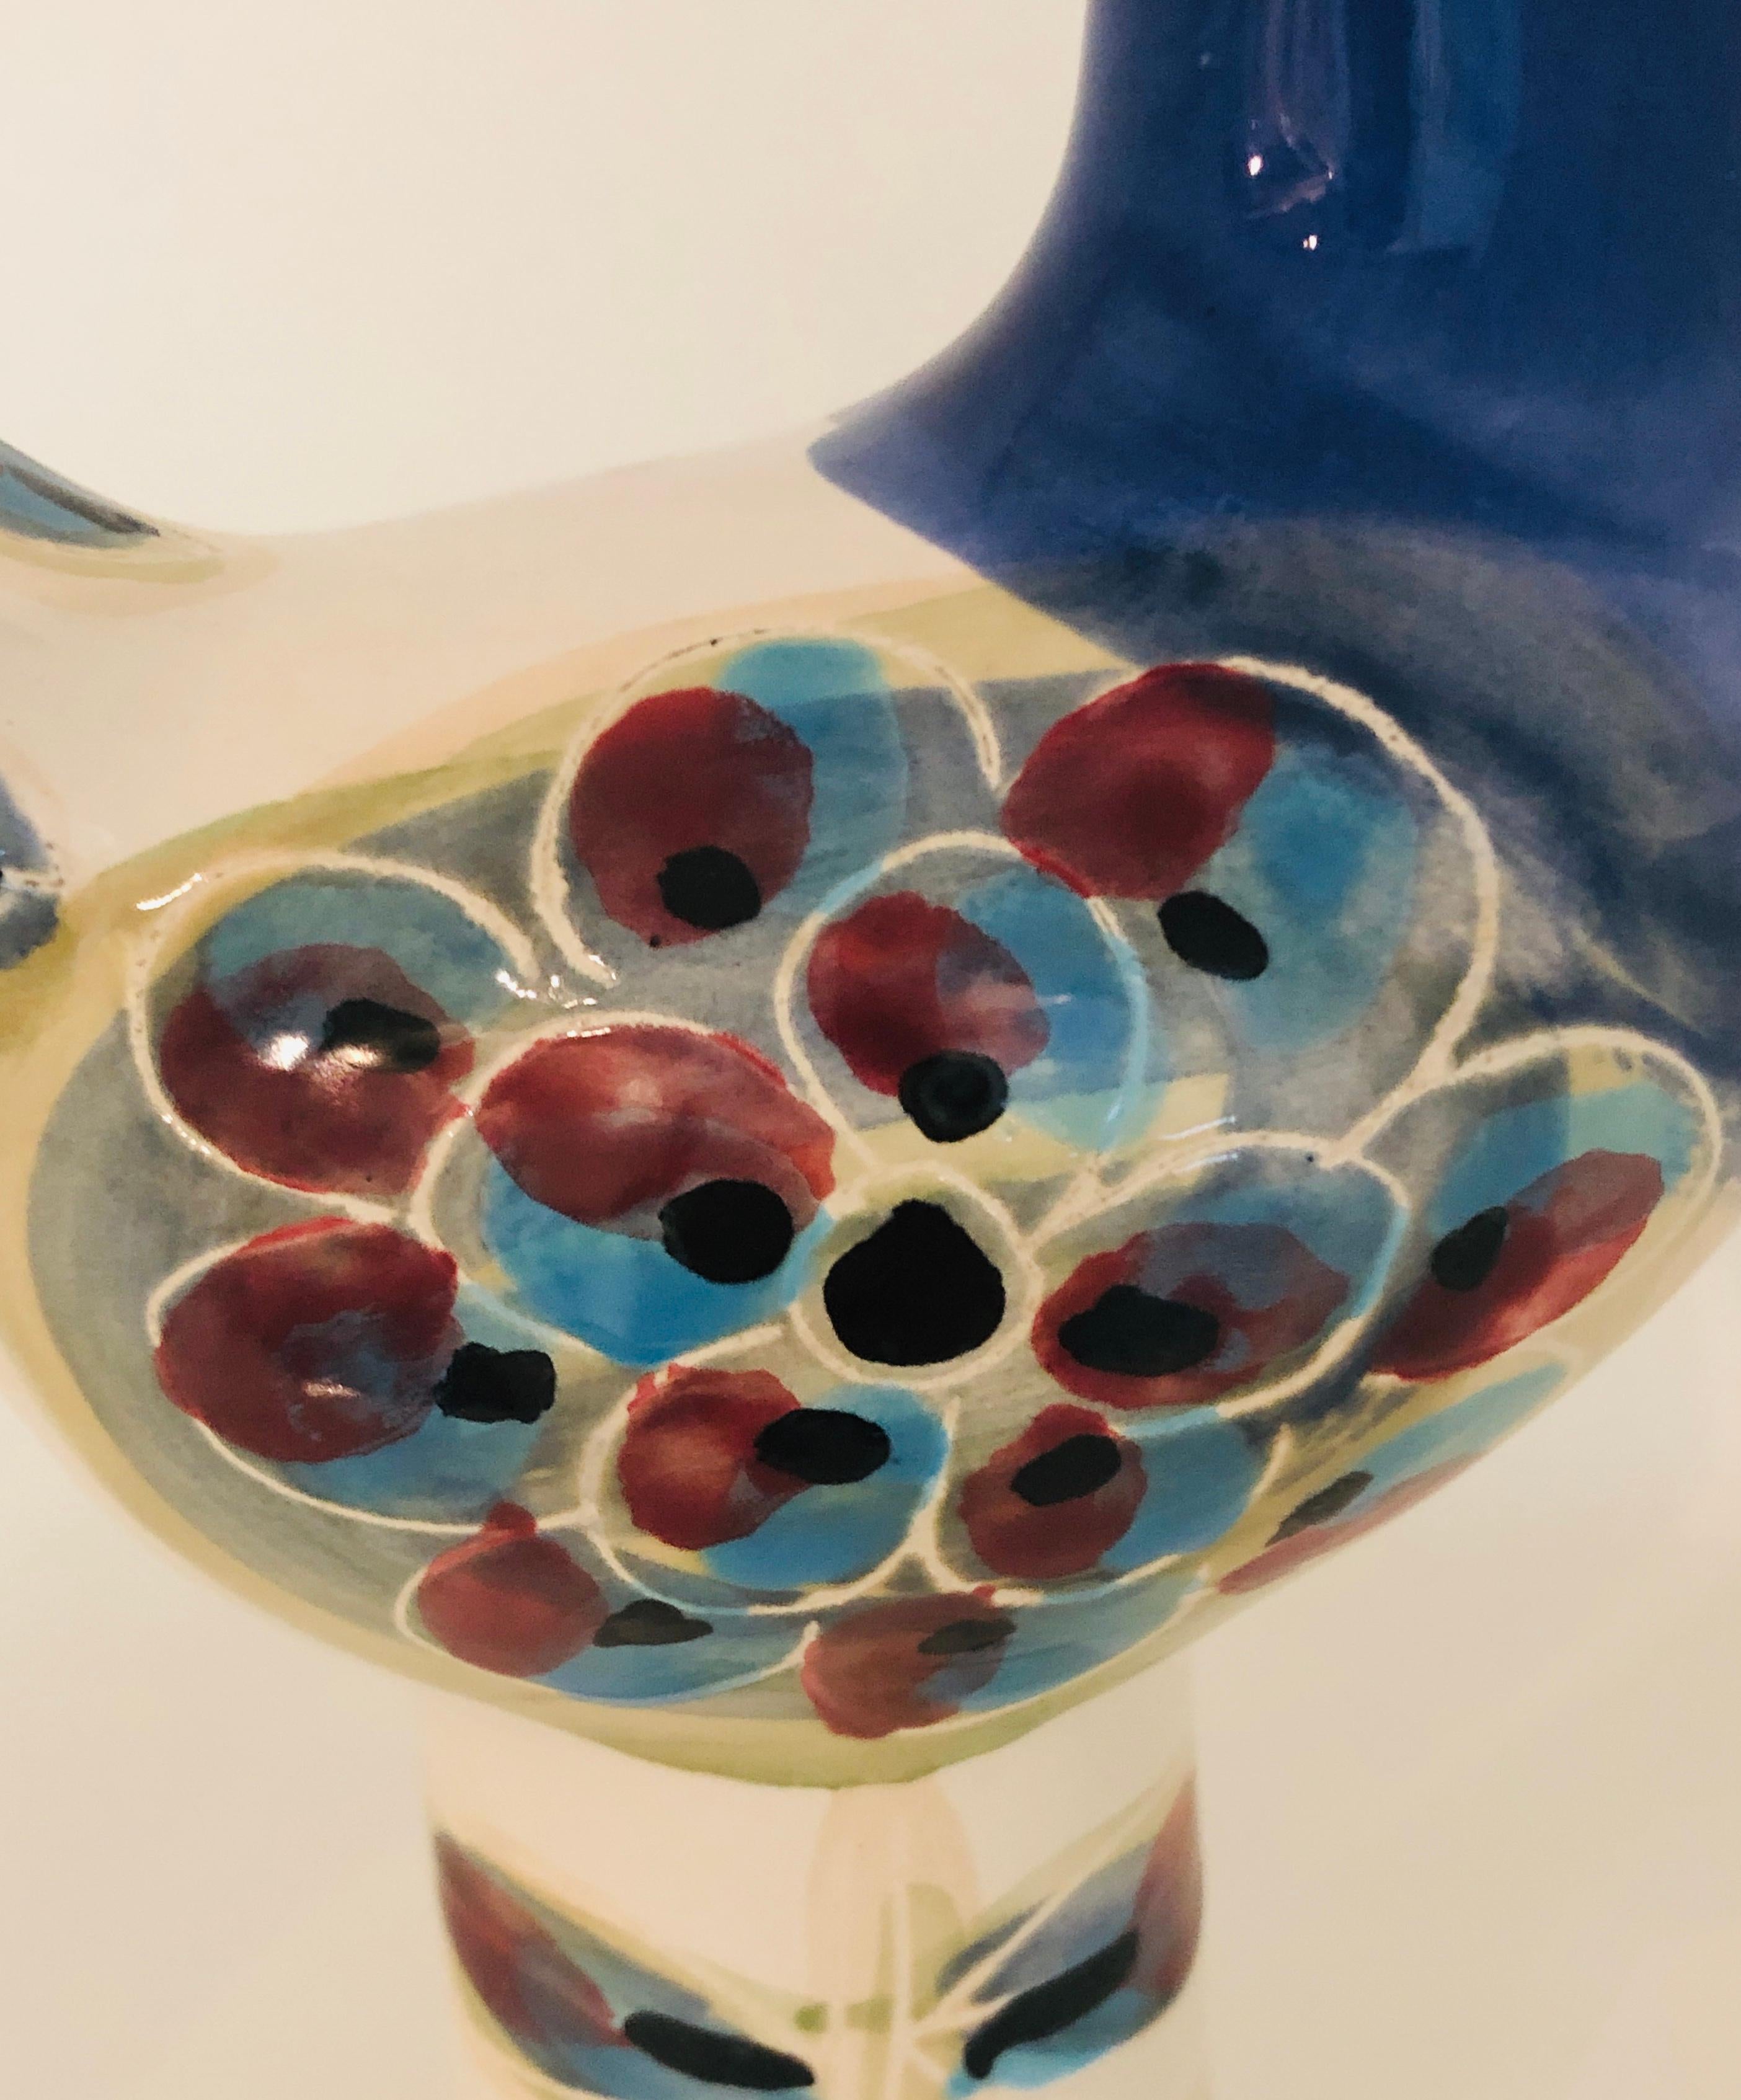 Blue, Ivory, Red and Black Abstract Zoomorphic Glazed Ceramic Bird Sculpture 13